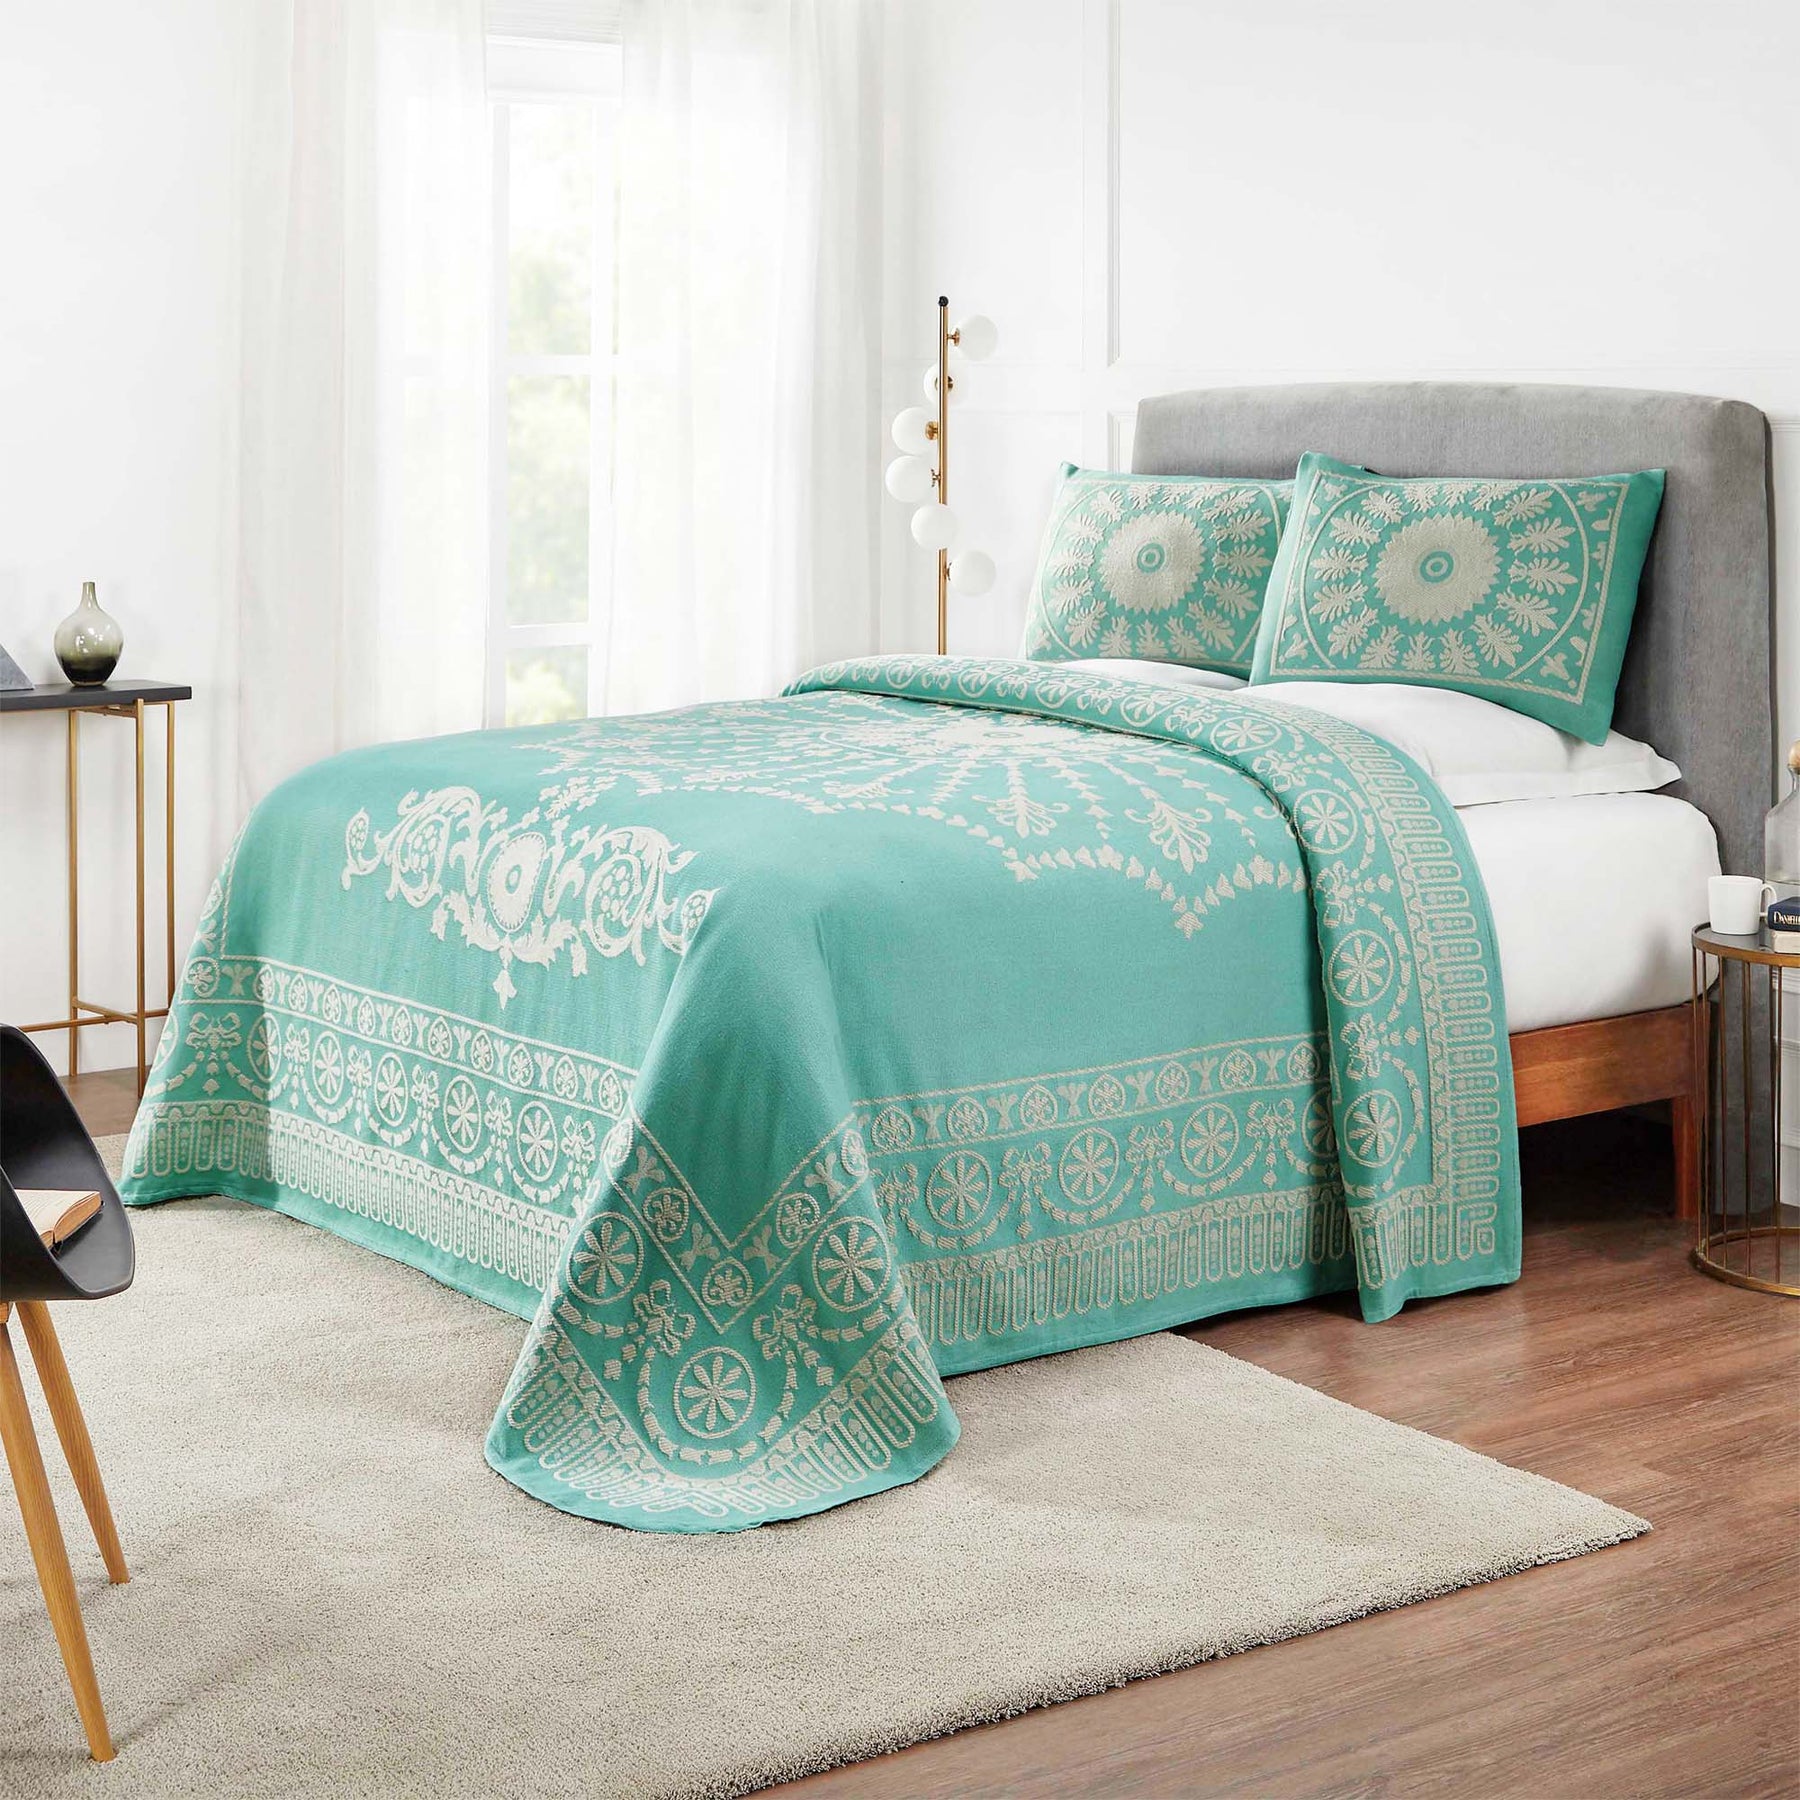 Superior Kymbal Cotton Blend Woven Traditional Medallion Lightweight Jacquard Bedspread and Sham Set